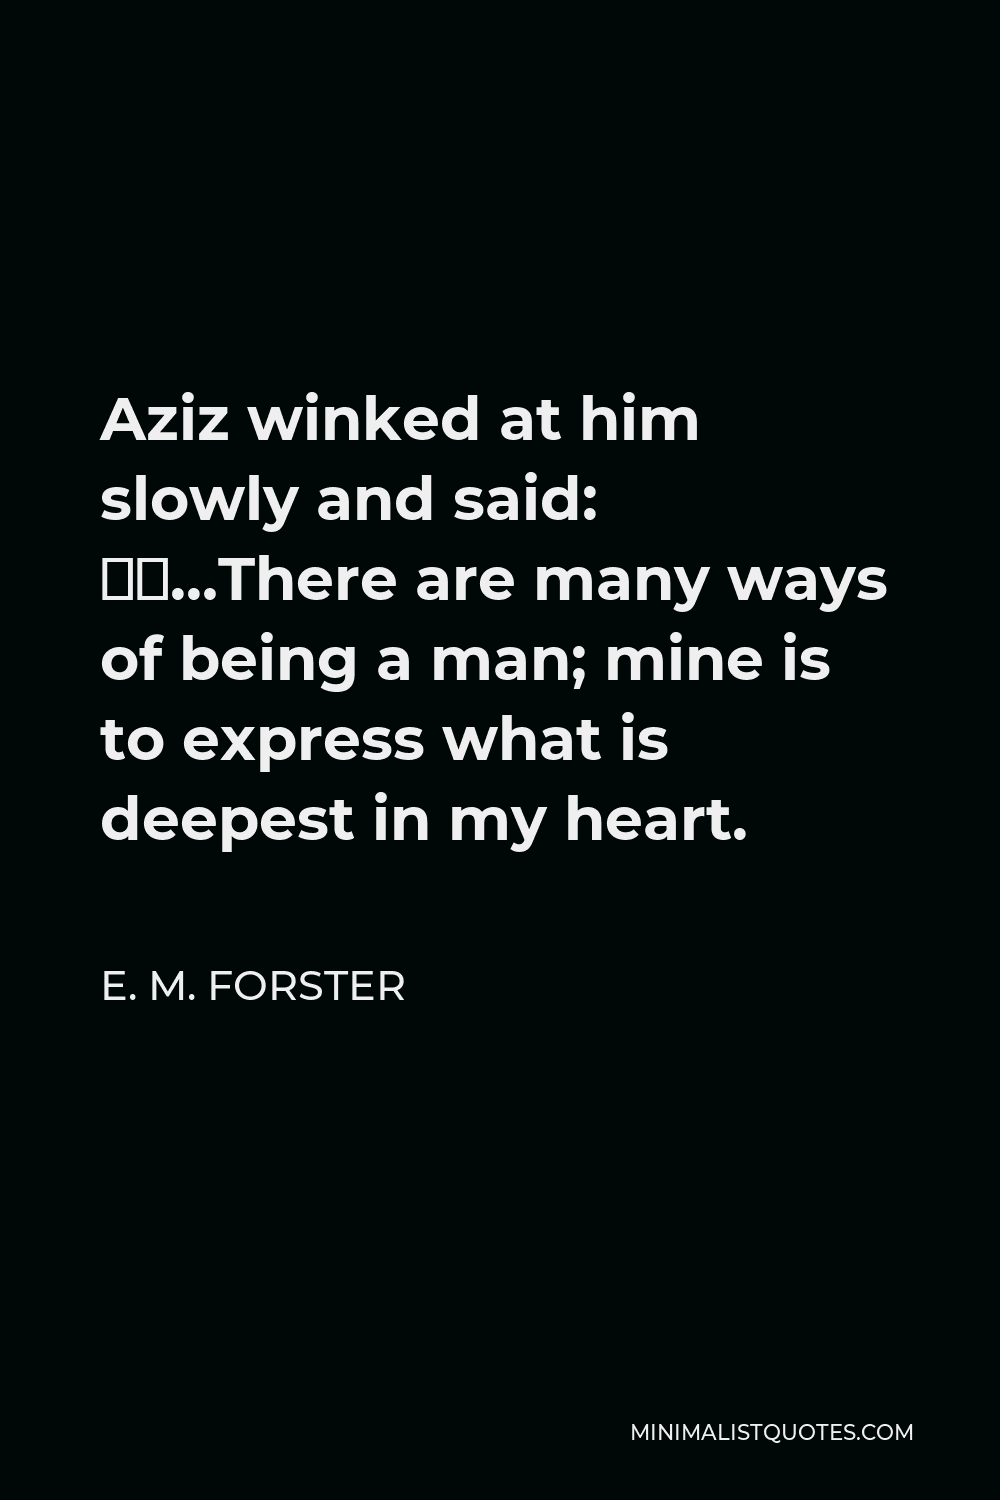 E. M. Forster Quote - Aziz winked at him slowly and said: “…There are many ways of being a man; mine is to express what is deepest in my heart.